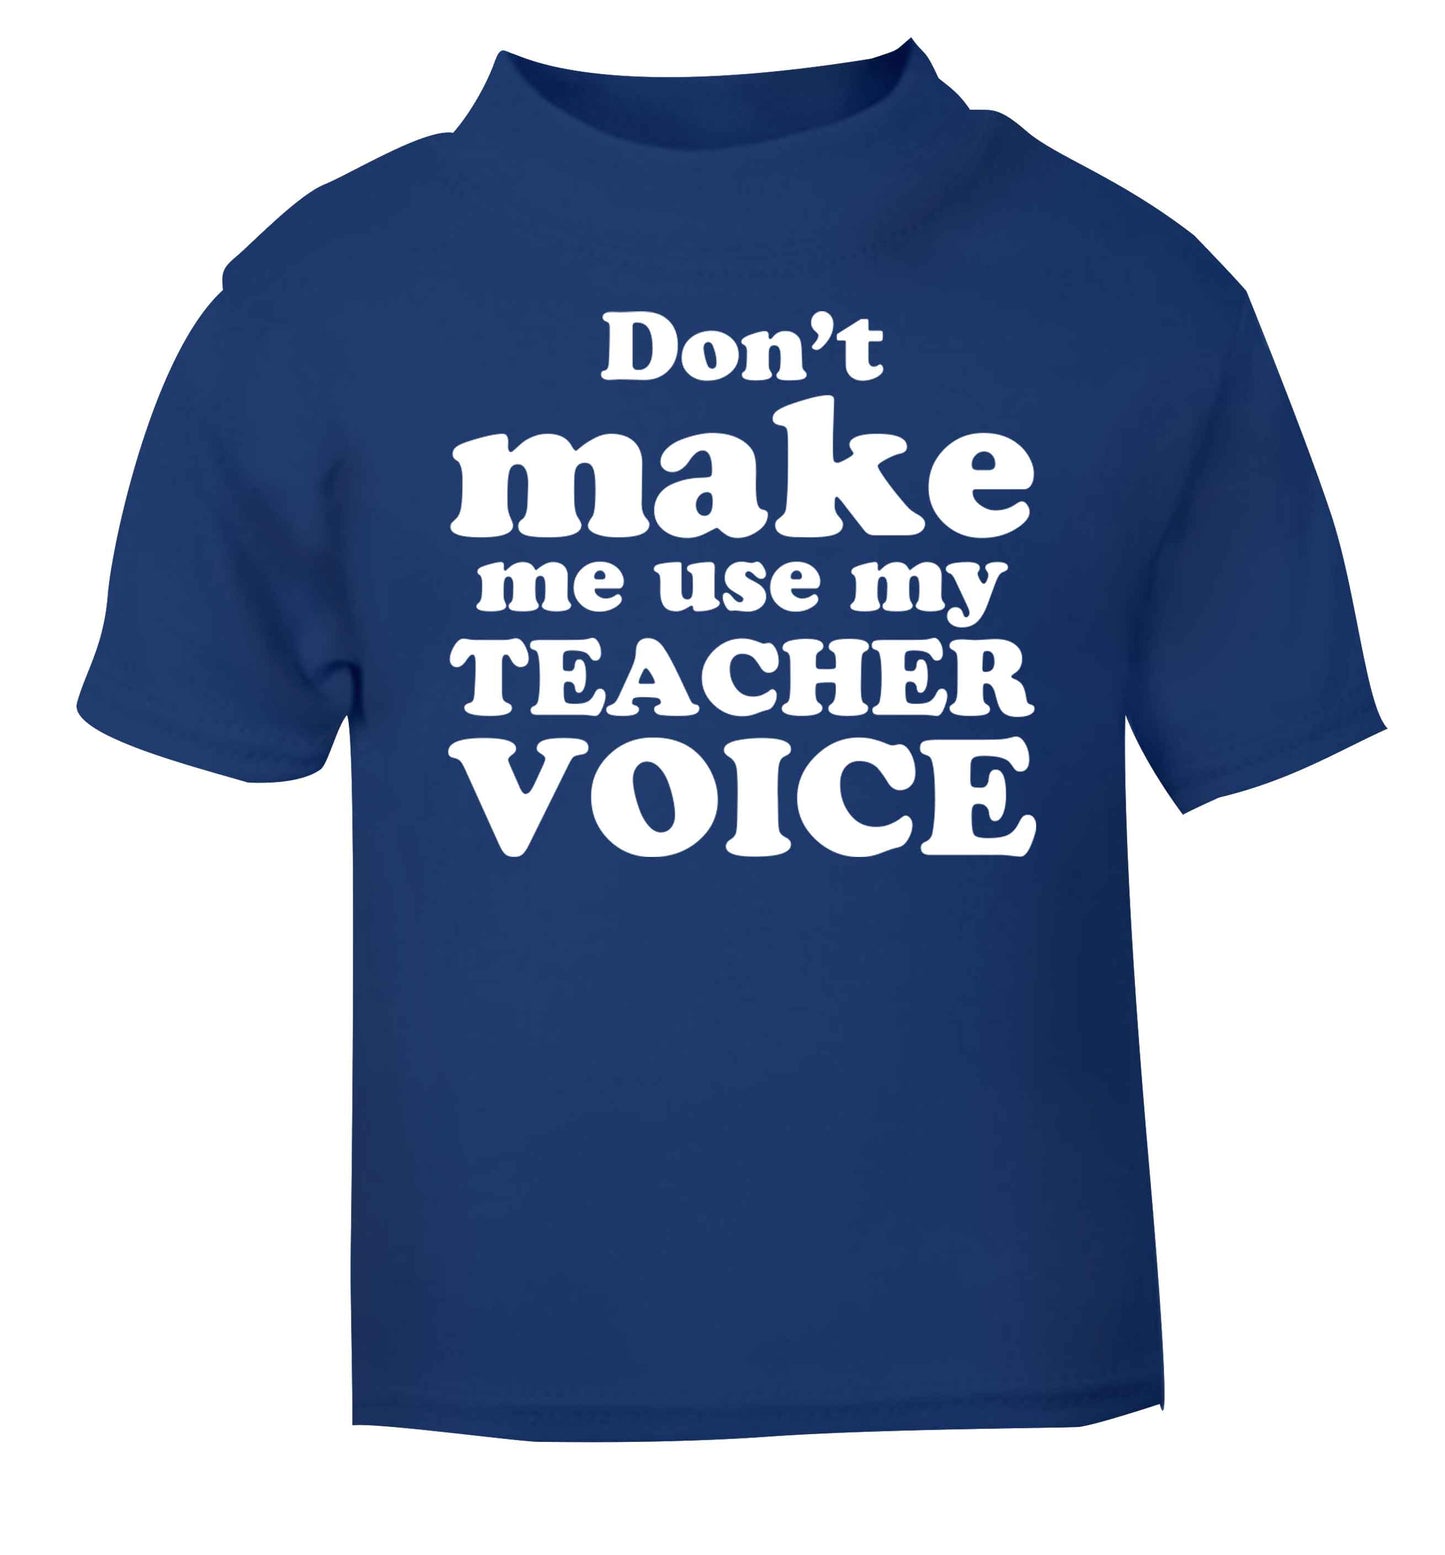 Don't make me use my teacher voice blue baby toddler Tshirt 2 Years